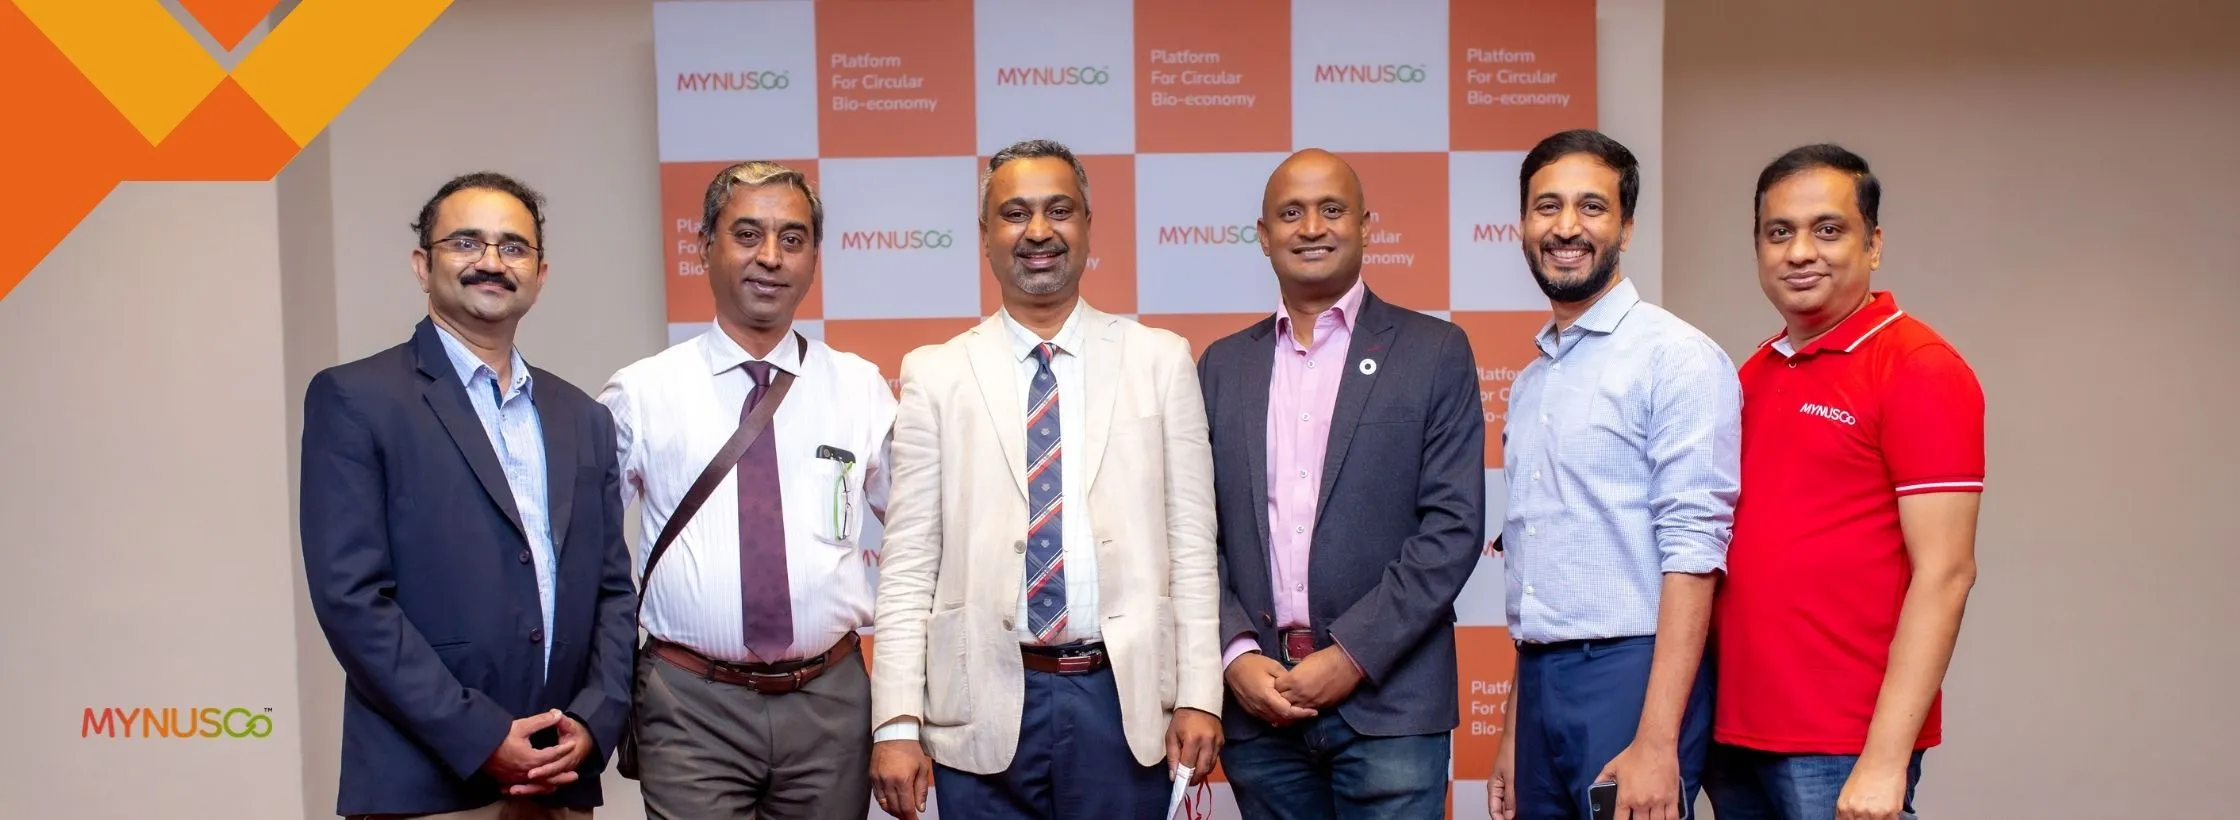 Mynusco creates biomaterial platform to tackle climate change The Hindu Business Line